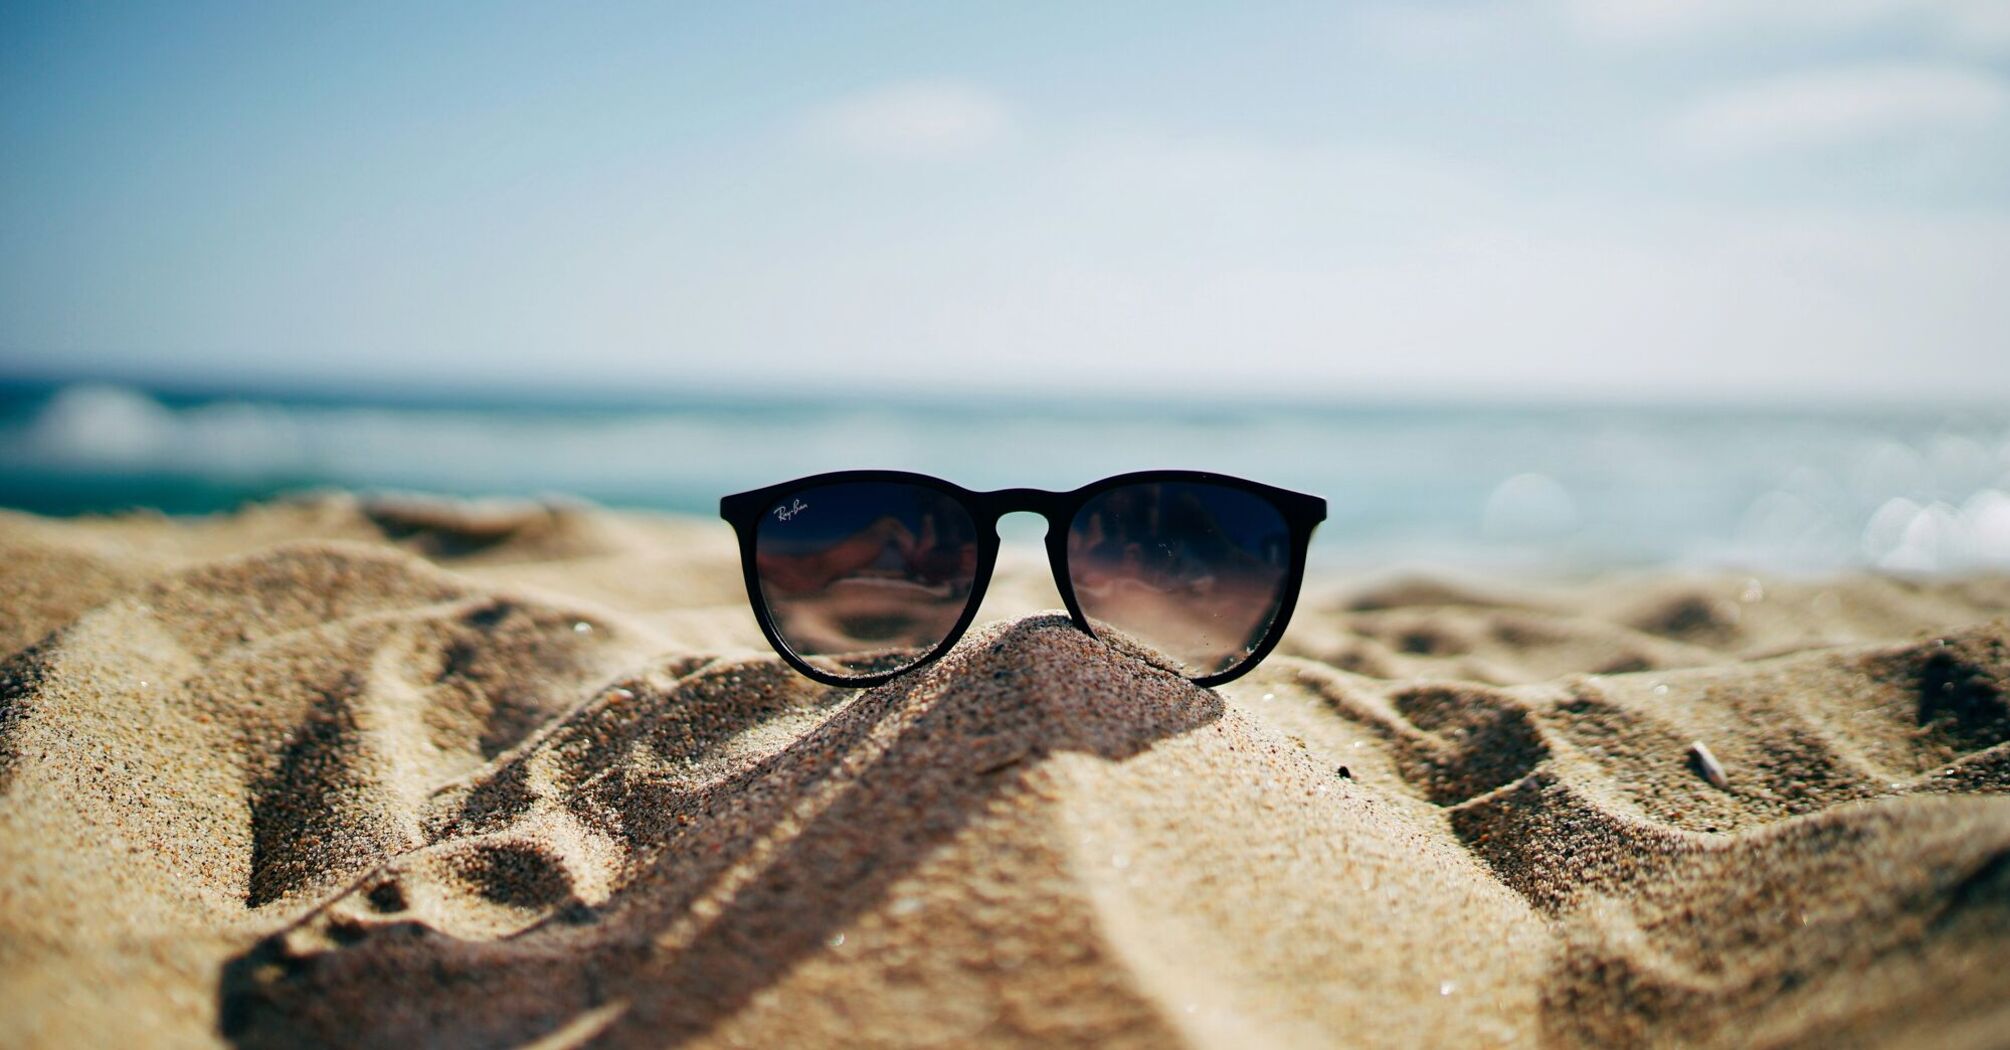 A pair of sunglasses on a sandy beach with the sea in the background 